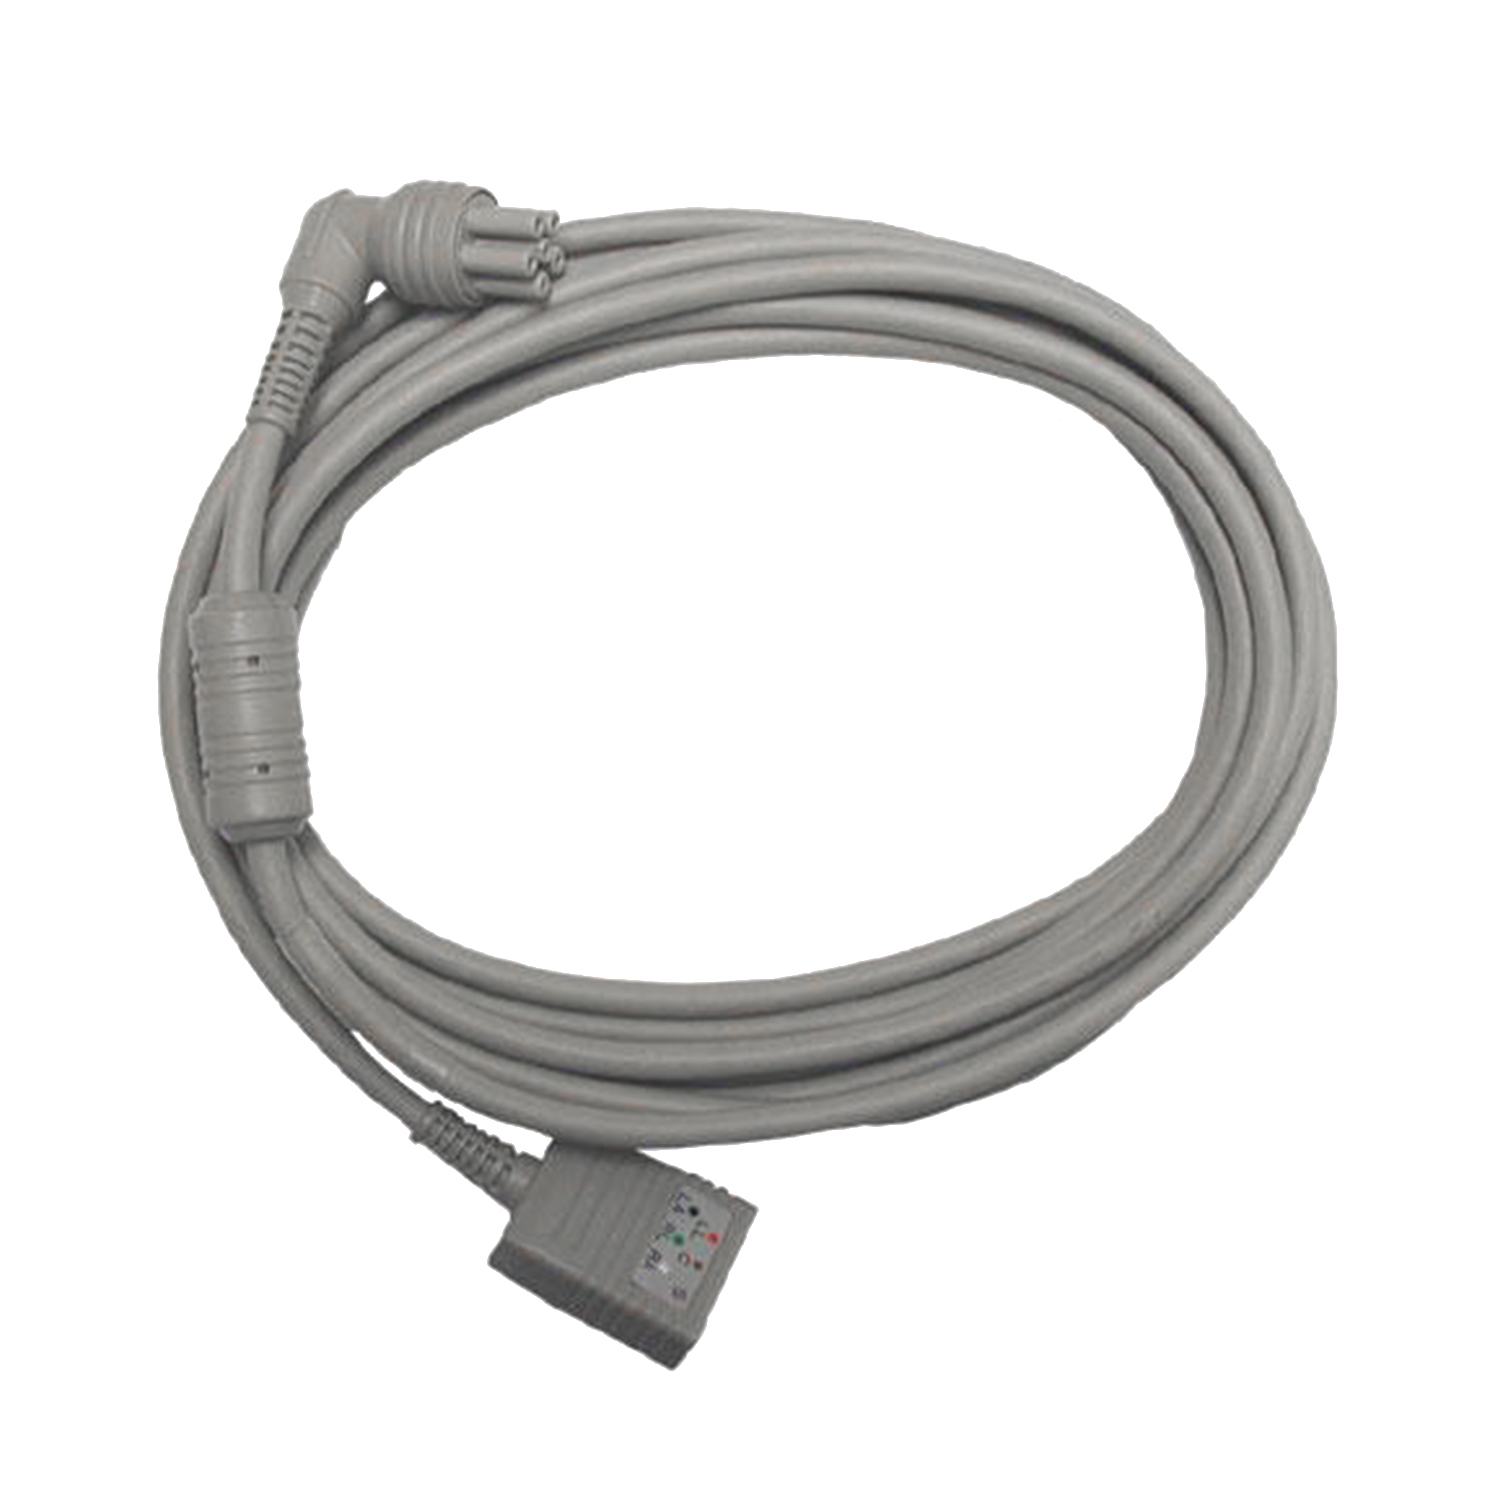 5-Lead ECG Patient Cable for ASM-5000